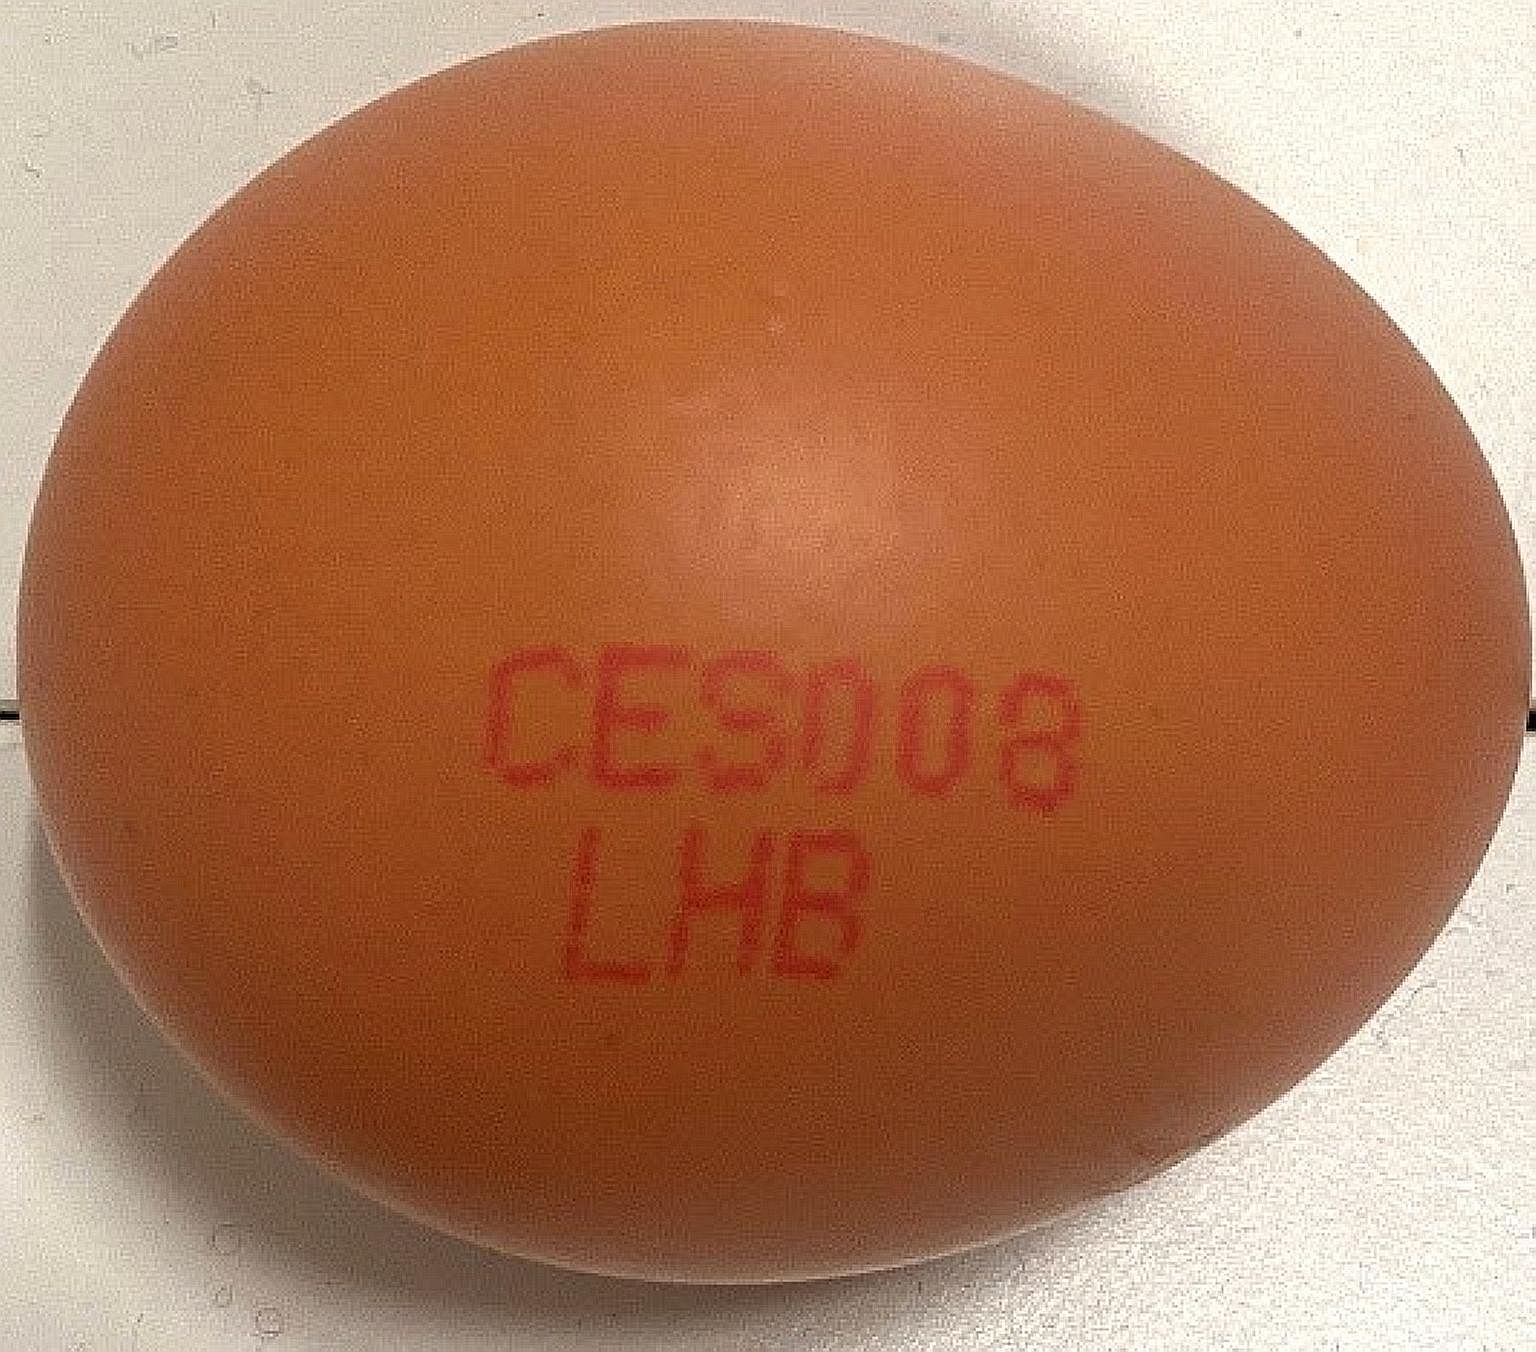 The Singapore Food Agency has directed several importers to recall eggs with the farm code "CES008", after discovering the presence of Salmonella enteritidis, which may cause illness if food is consumed raw or undercooked.